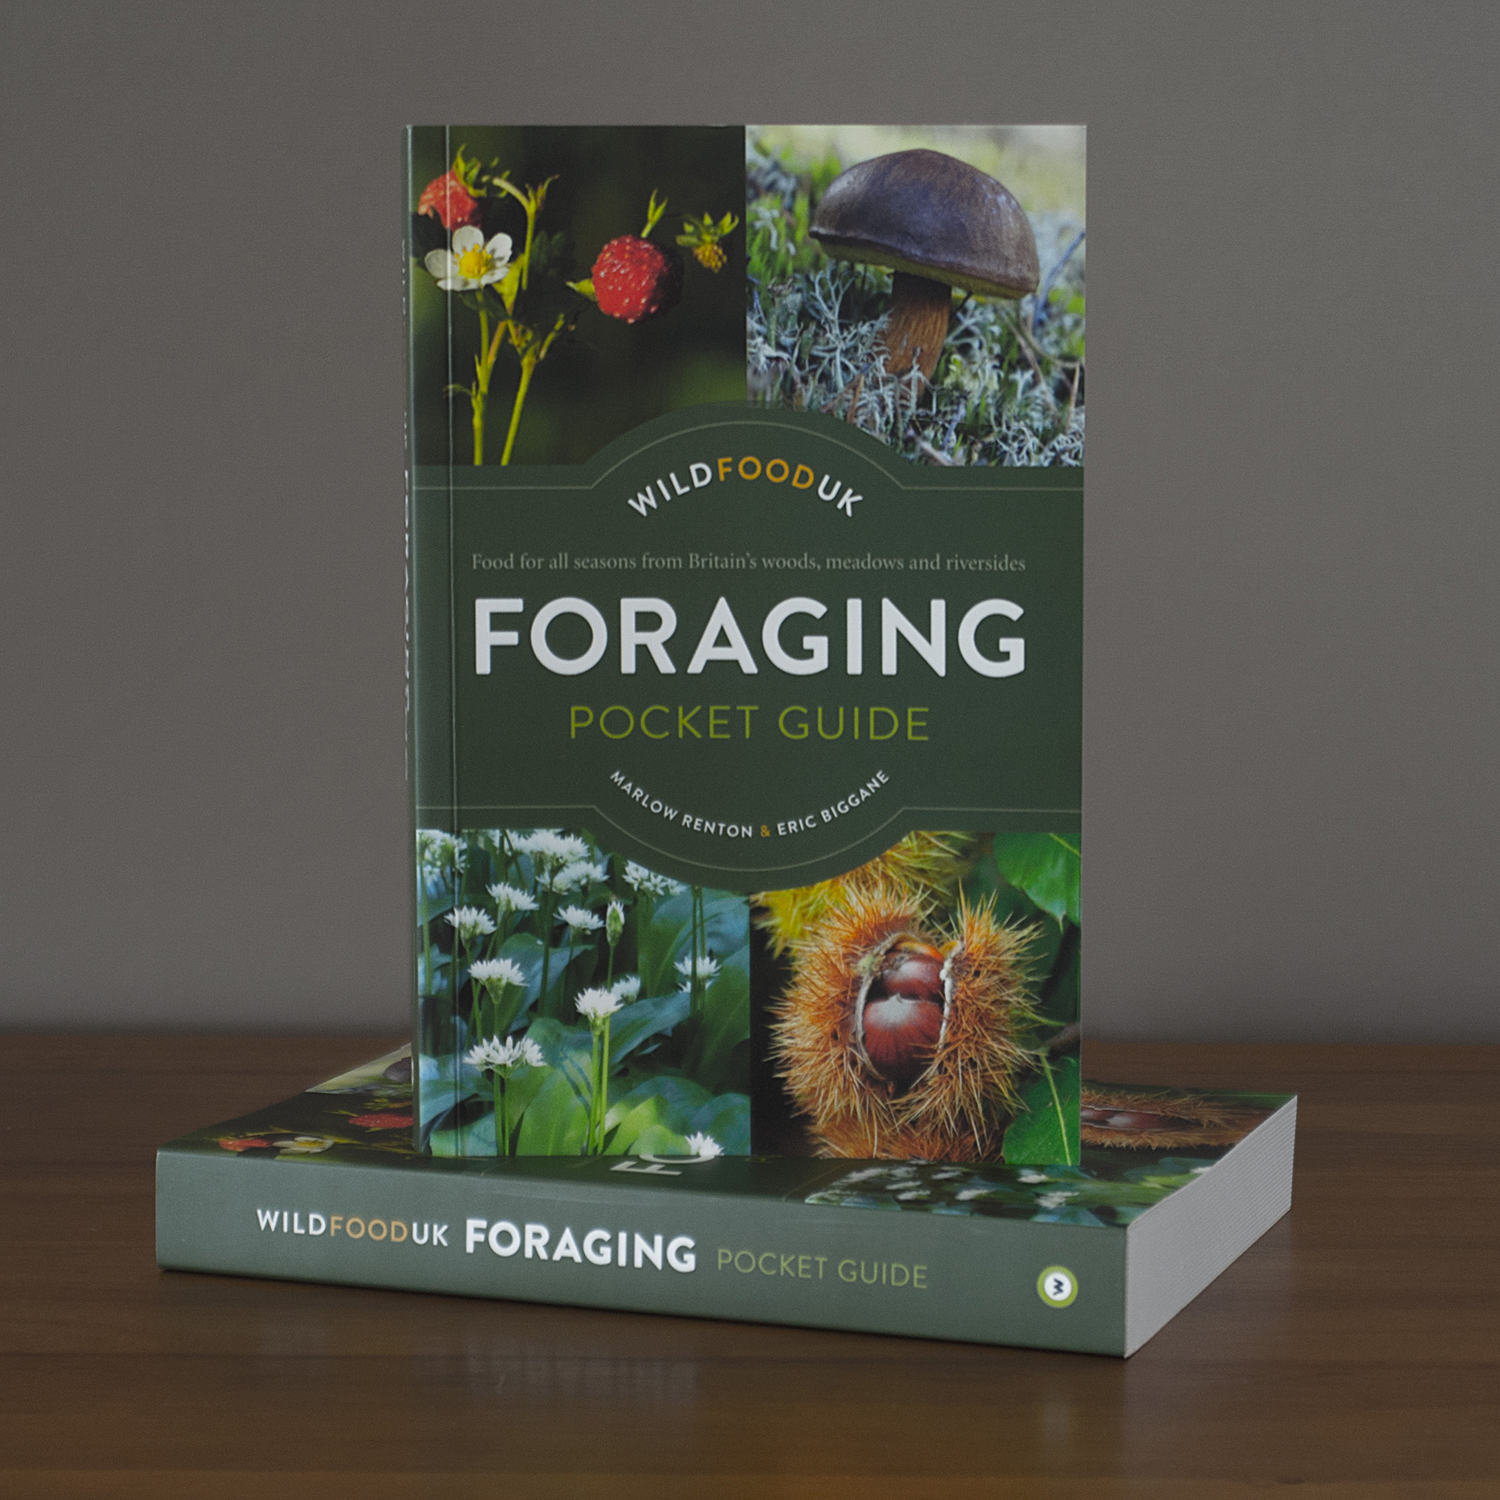 The Foraging Pocket Guide 